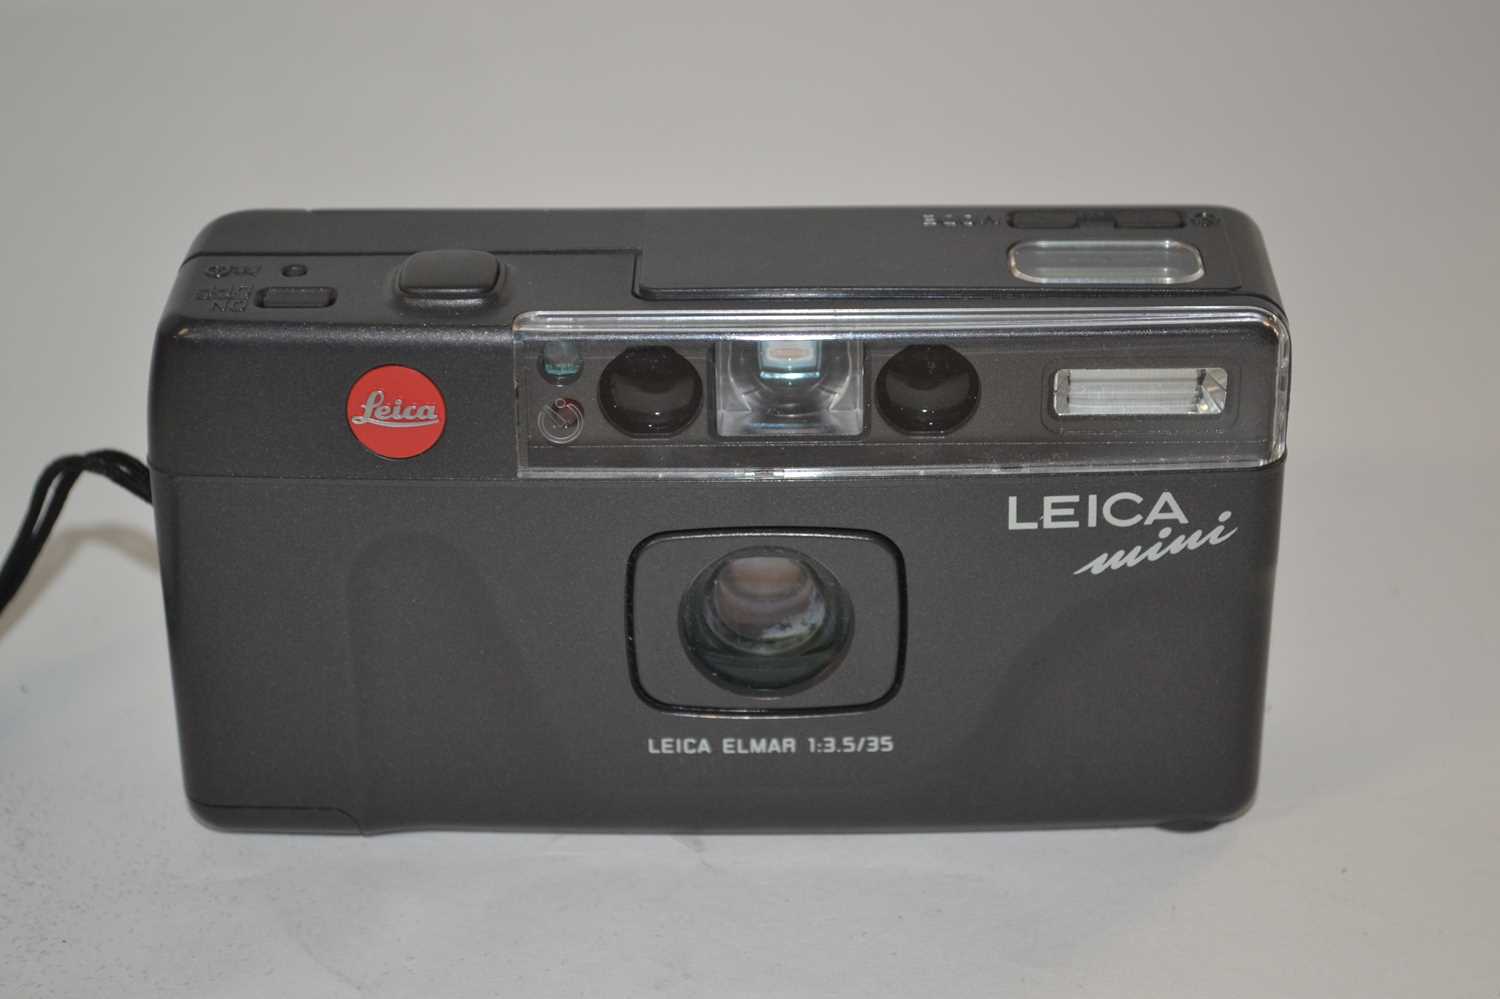 Camera and Photography Interest - A Leica mini camera and instructions - Bild 2 aus 3